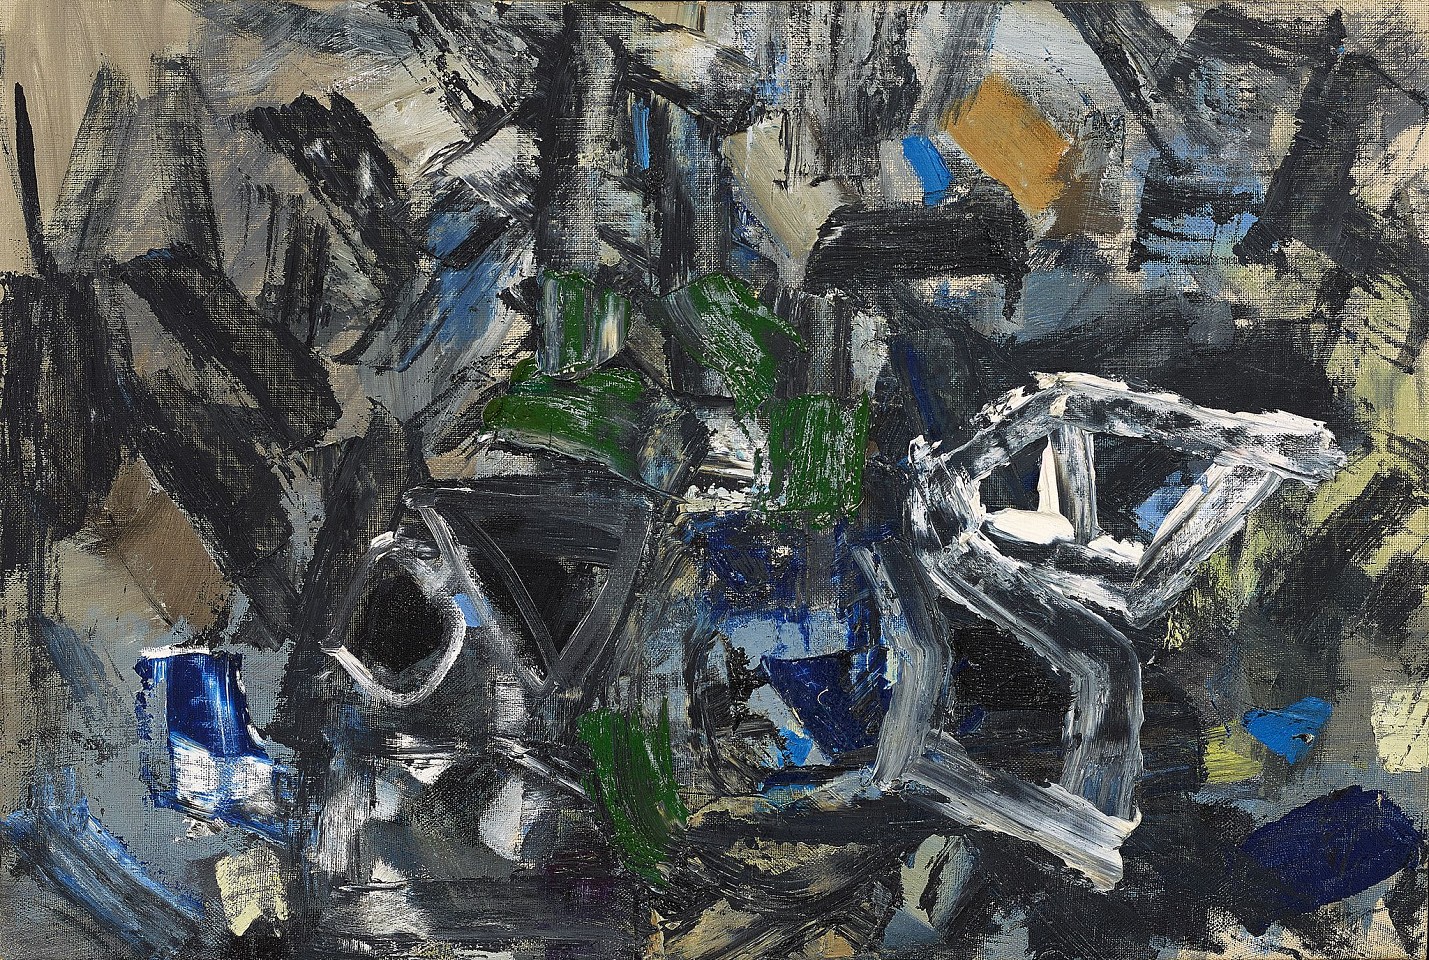 Yvonne Thomas, Nocturnal, 1955
Oil on linen, 19 x 28 in. (48.3 x 71.1 cm)
THO-00029